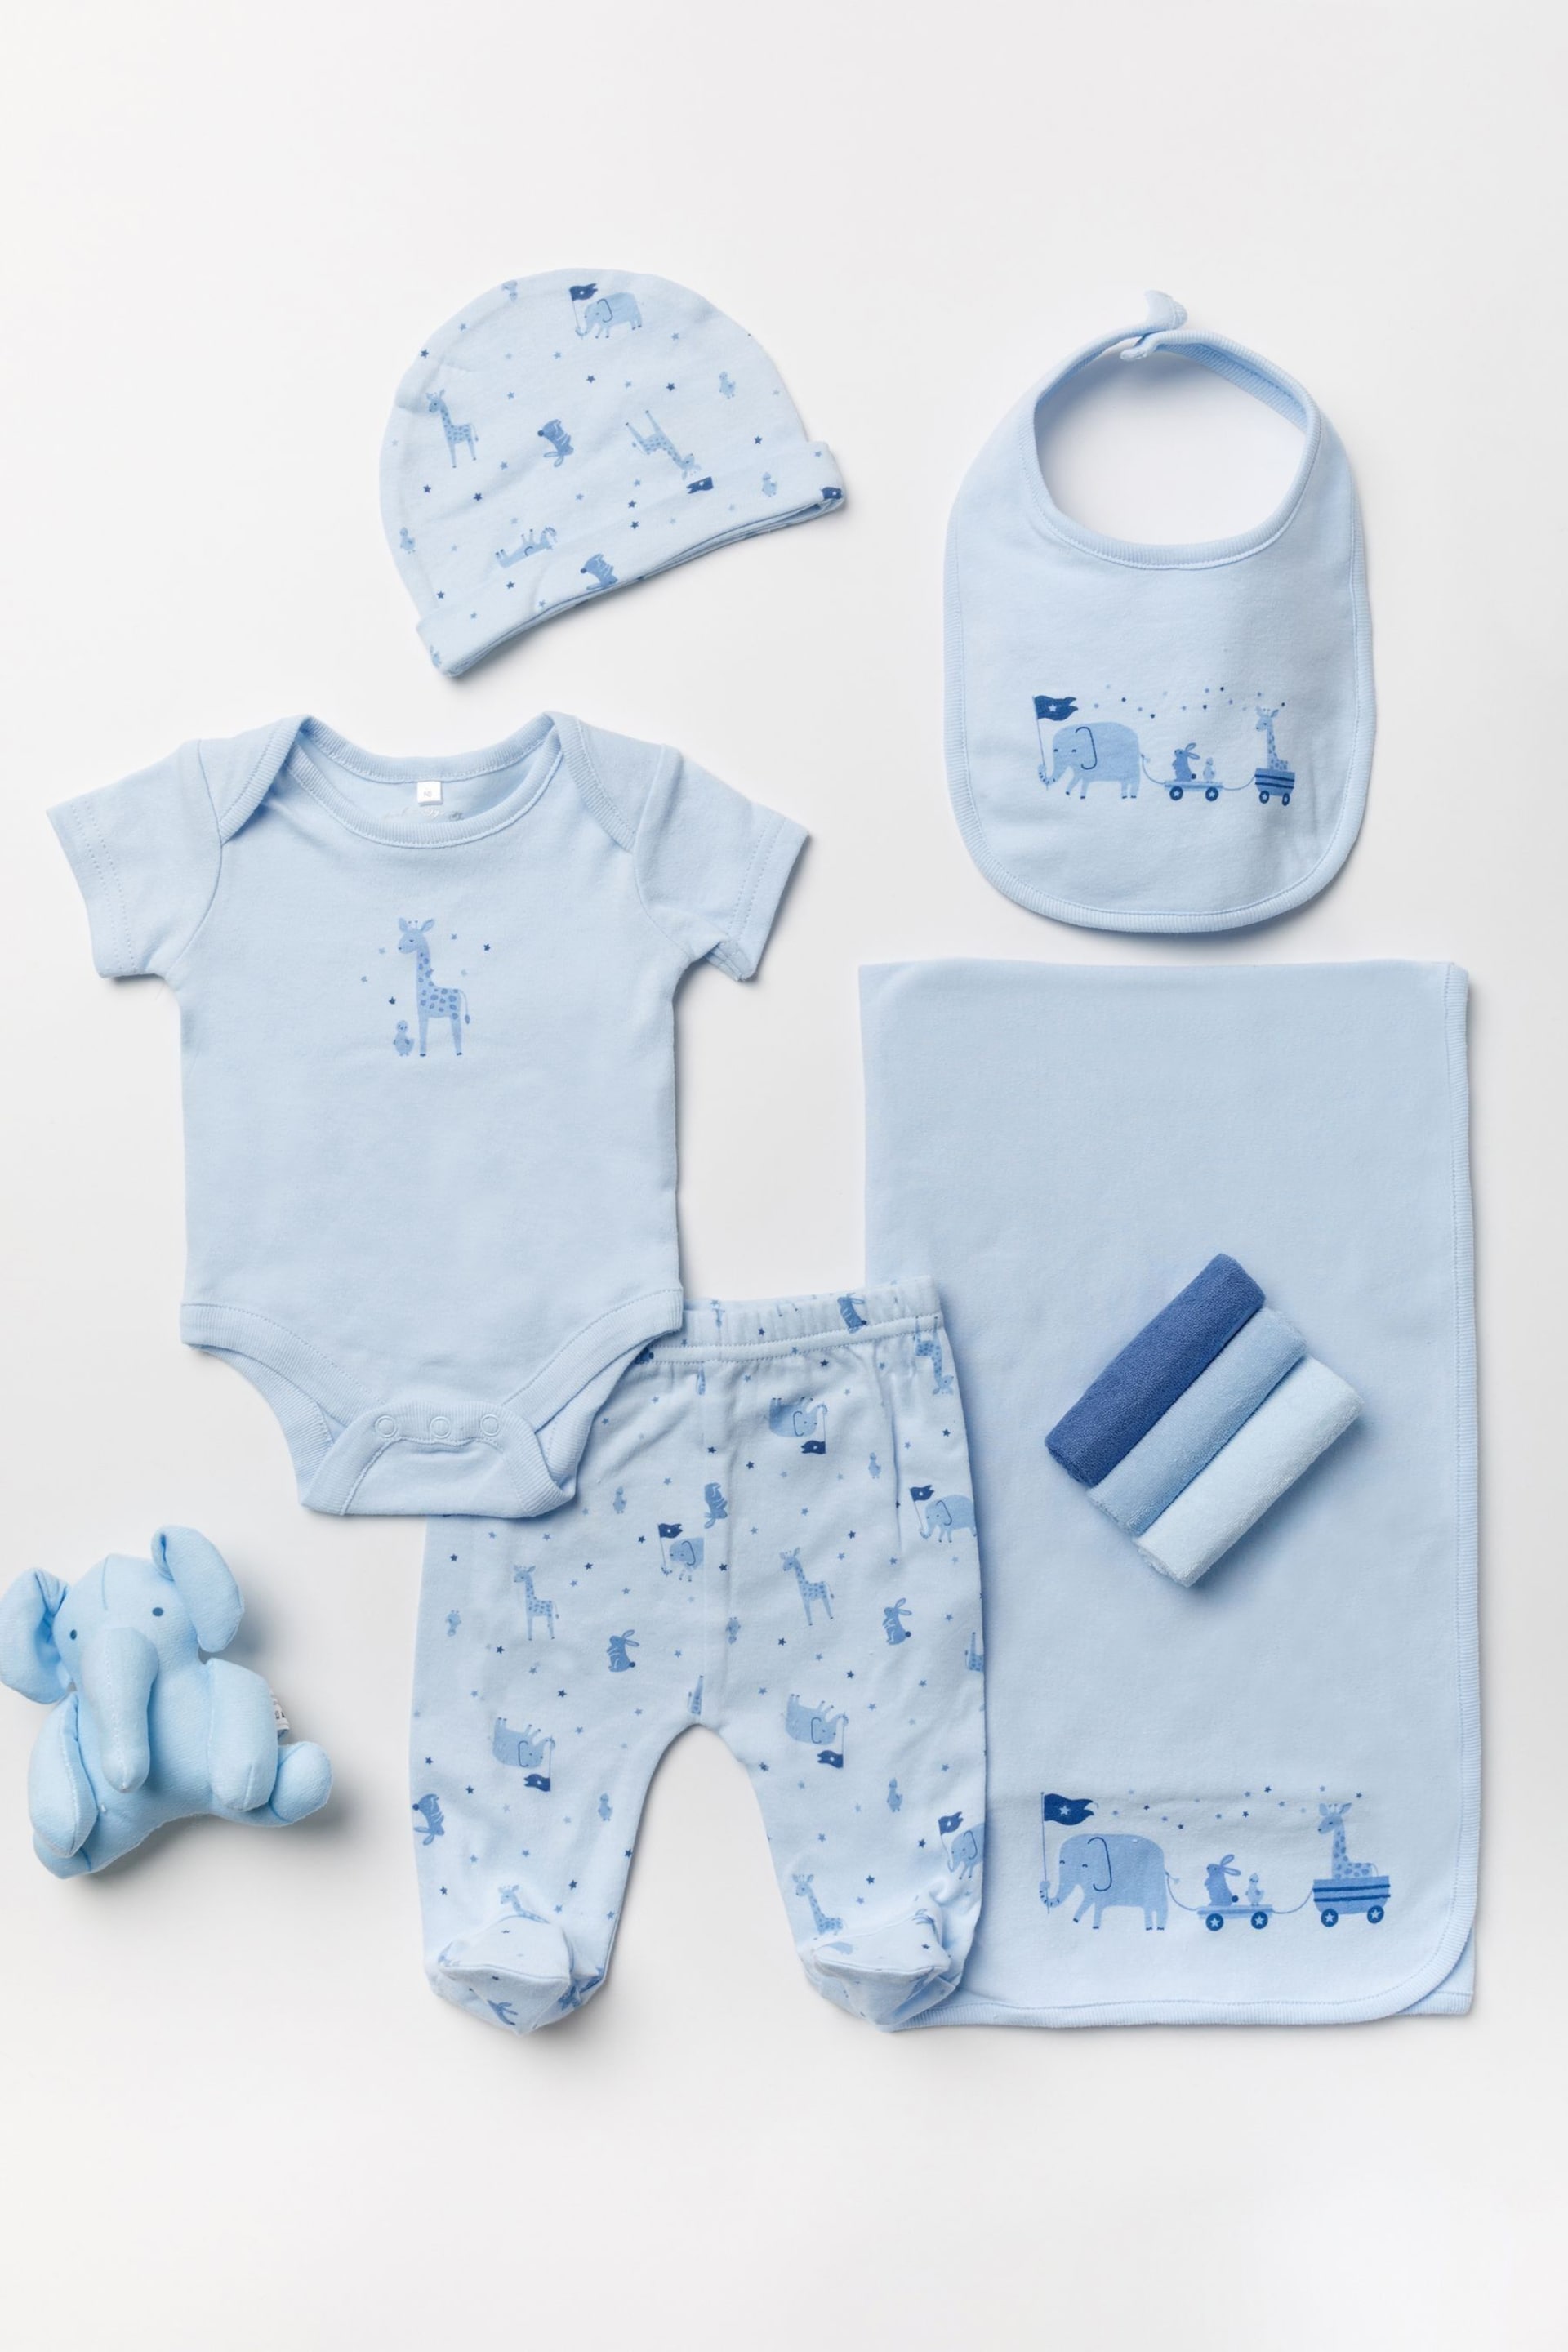 10-Piece Printed Baby Gift Set - Image 1 of 6